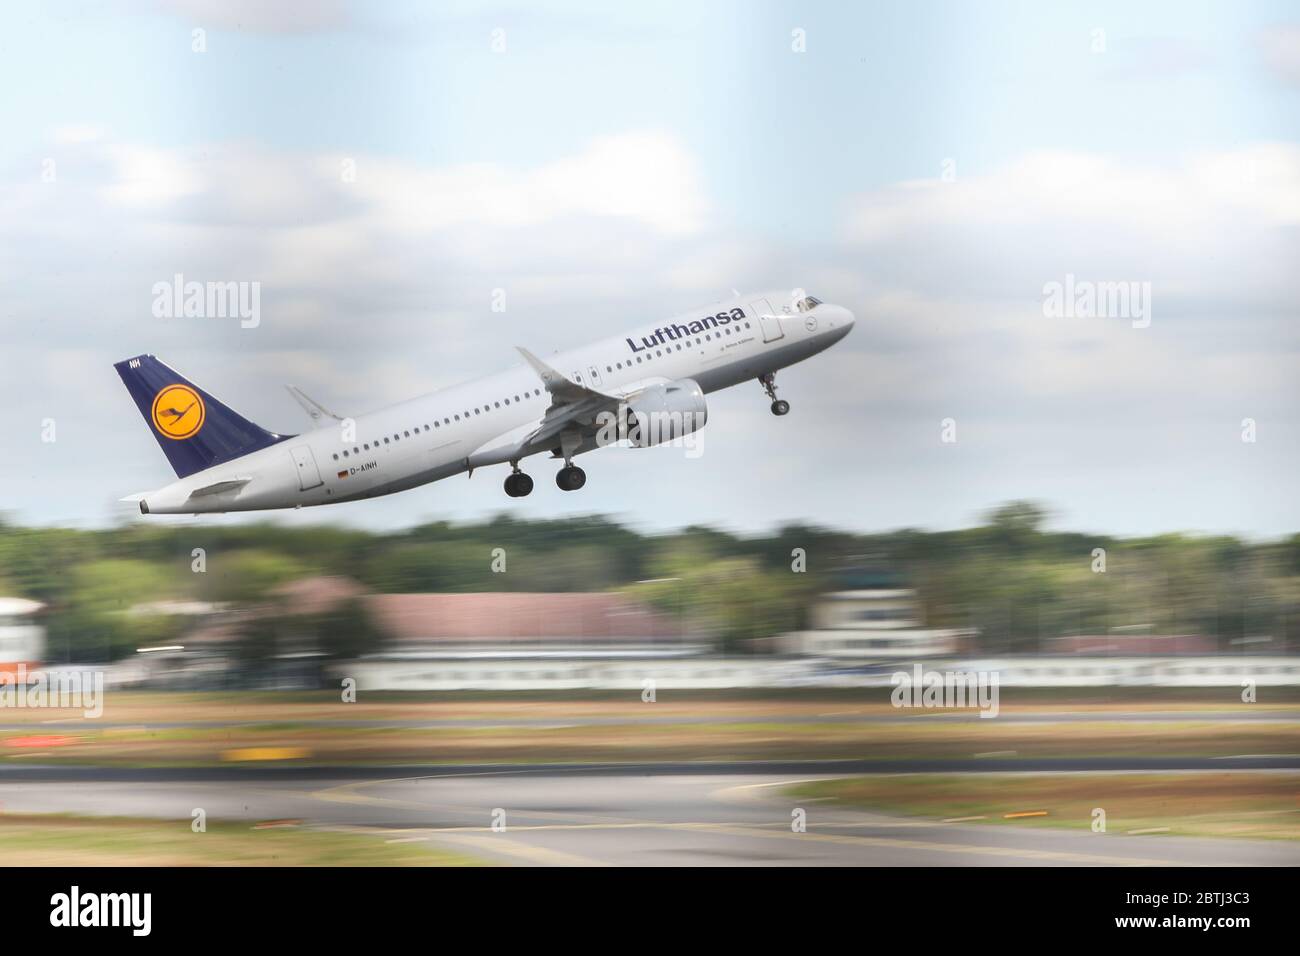 Berlin, Germany. 26th May, 2020. A plane of Lufthansa takes off at the Berlin Tegel Airport in Berlin, capital of Germany, May 26, 2020. German flag carrier Deutsche Lufthansa AG said on Monday that the federal government's Economic Stabilization Fund (WSF) has approved a nine-billion-euro rescue package (9.8 billion U.S. dollars) for the company. Credit: Shan Yuqi/Xinhua/Alamy Live News Stock Photo